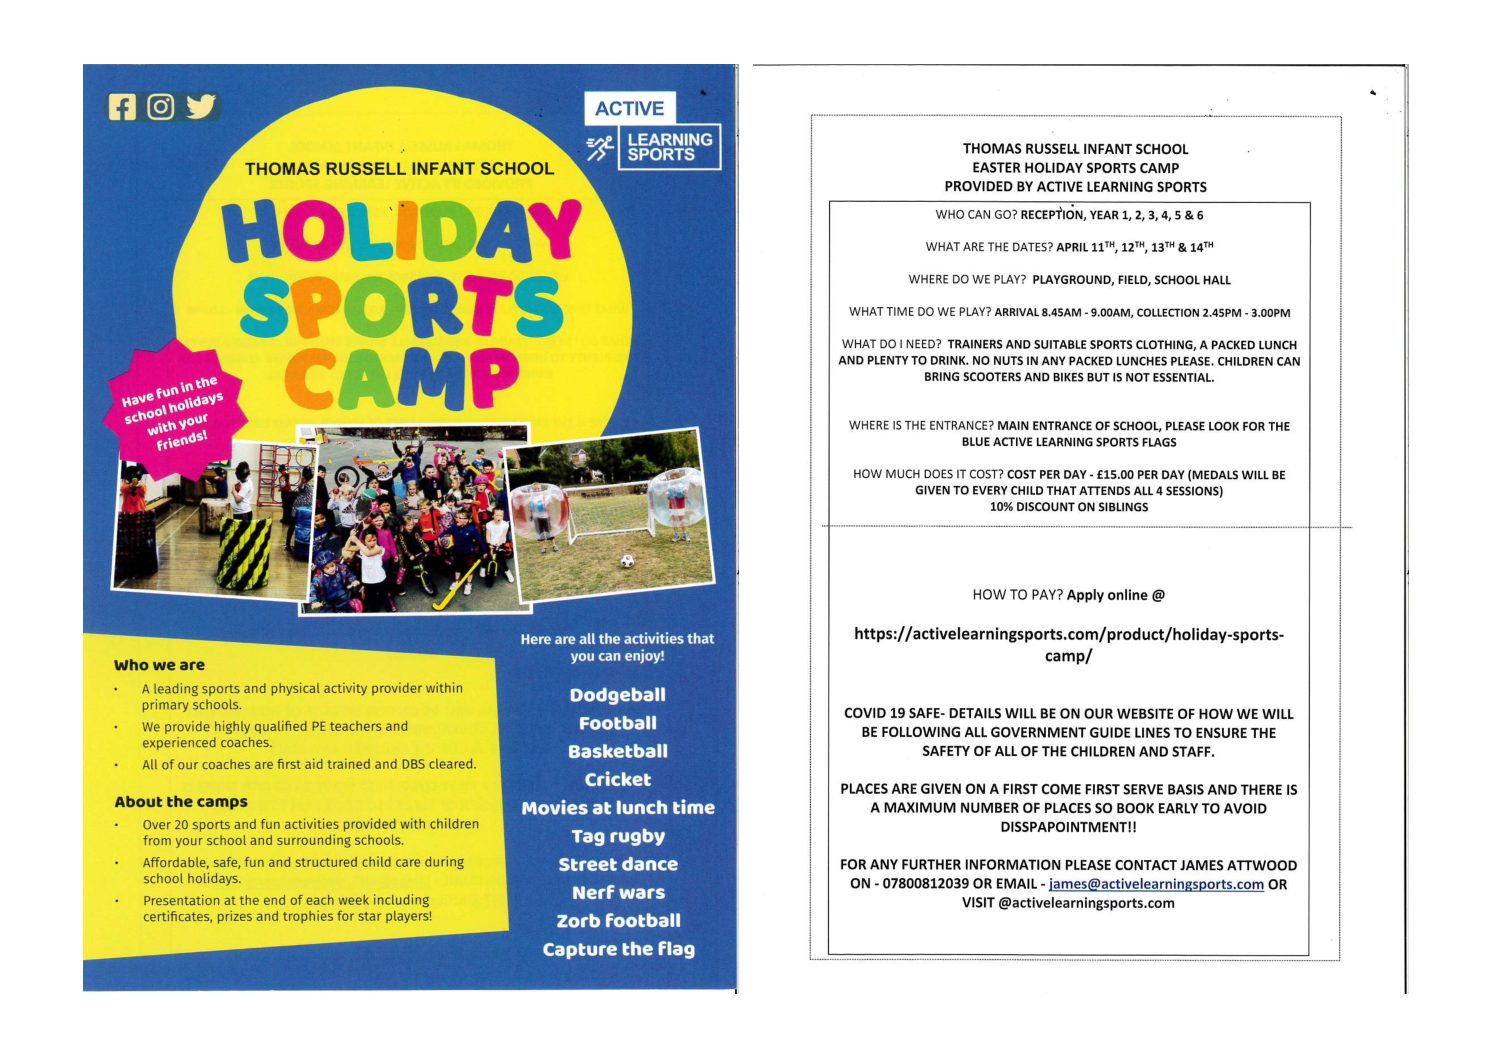 Easter Holiday Sports Camp – Thomas Russell Infant School